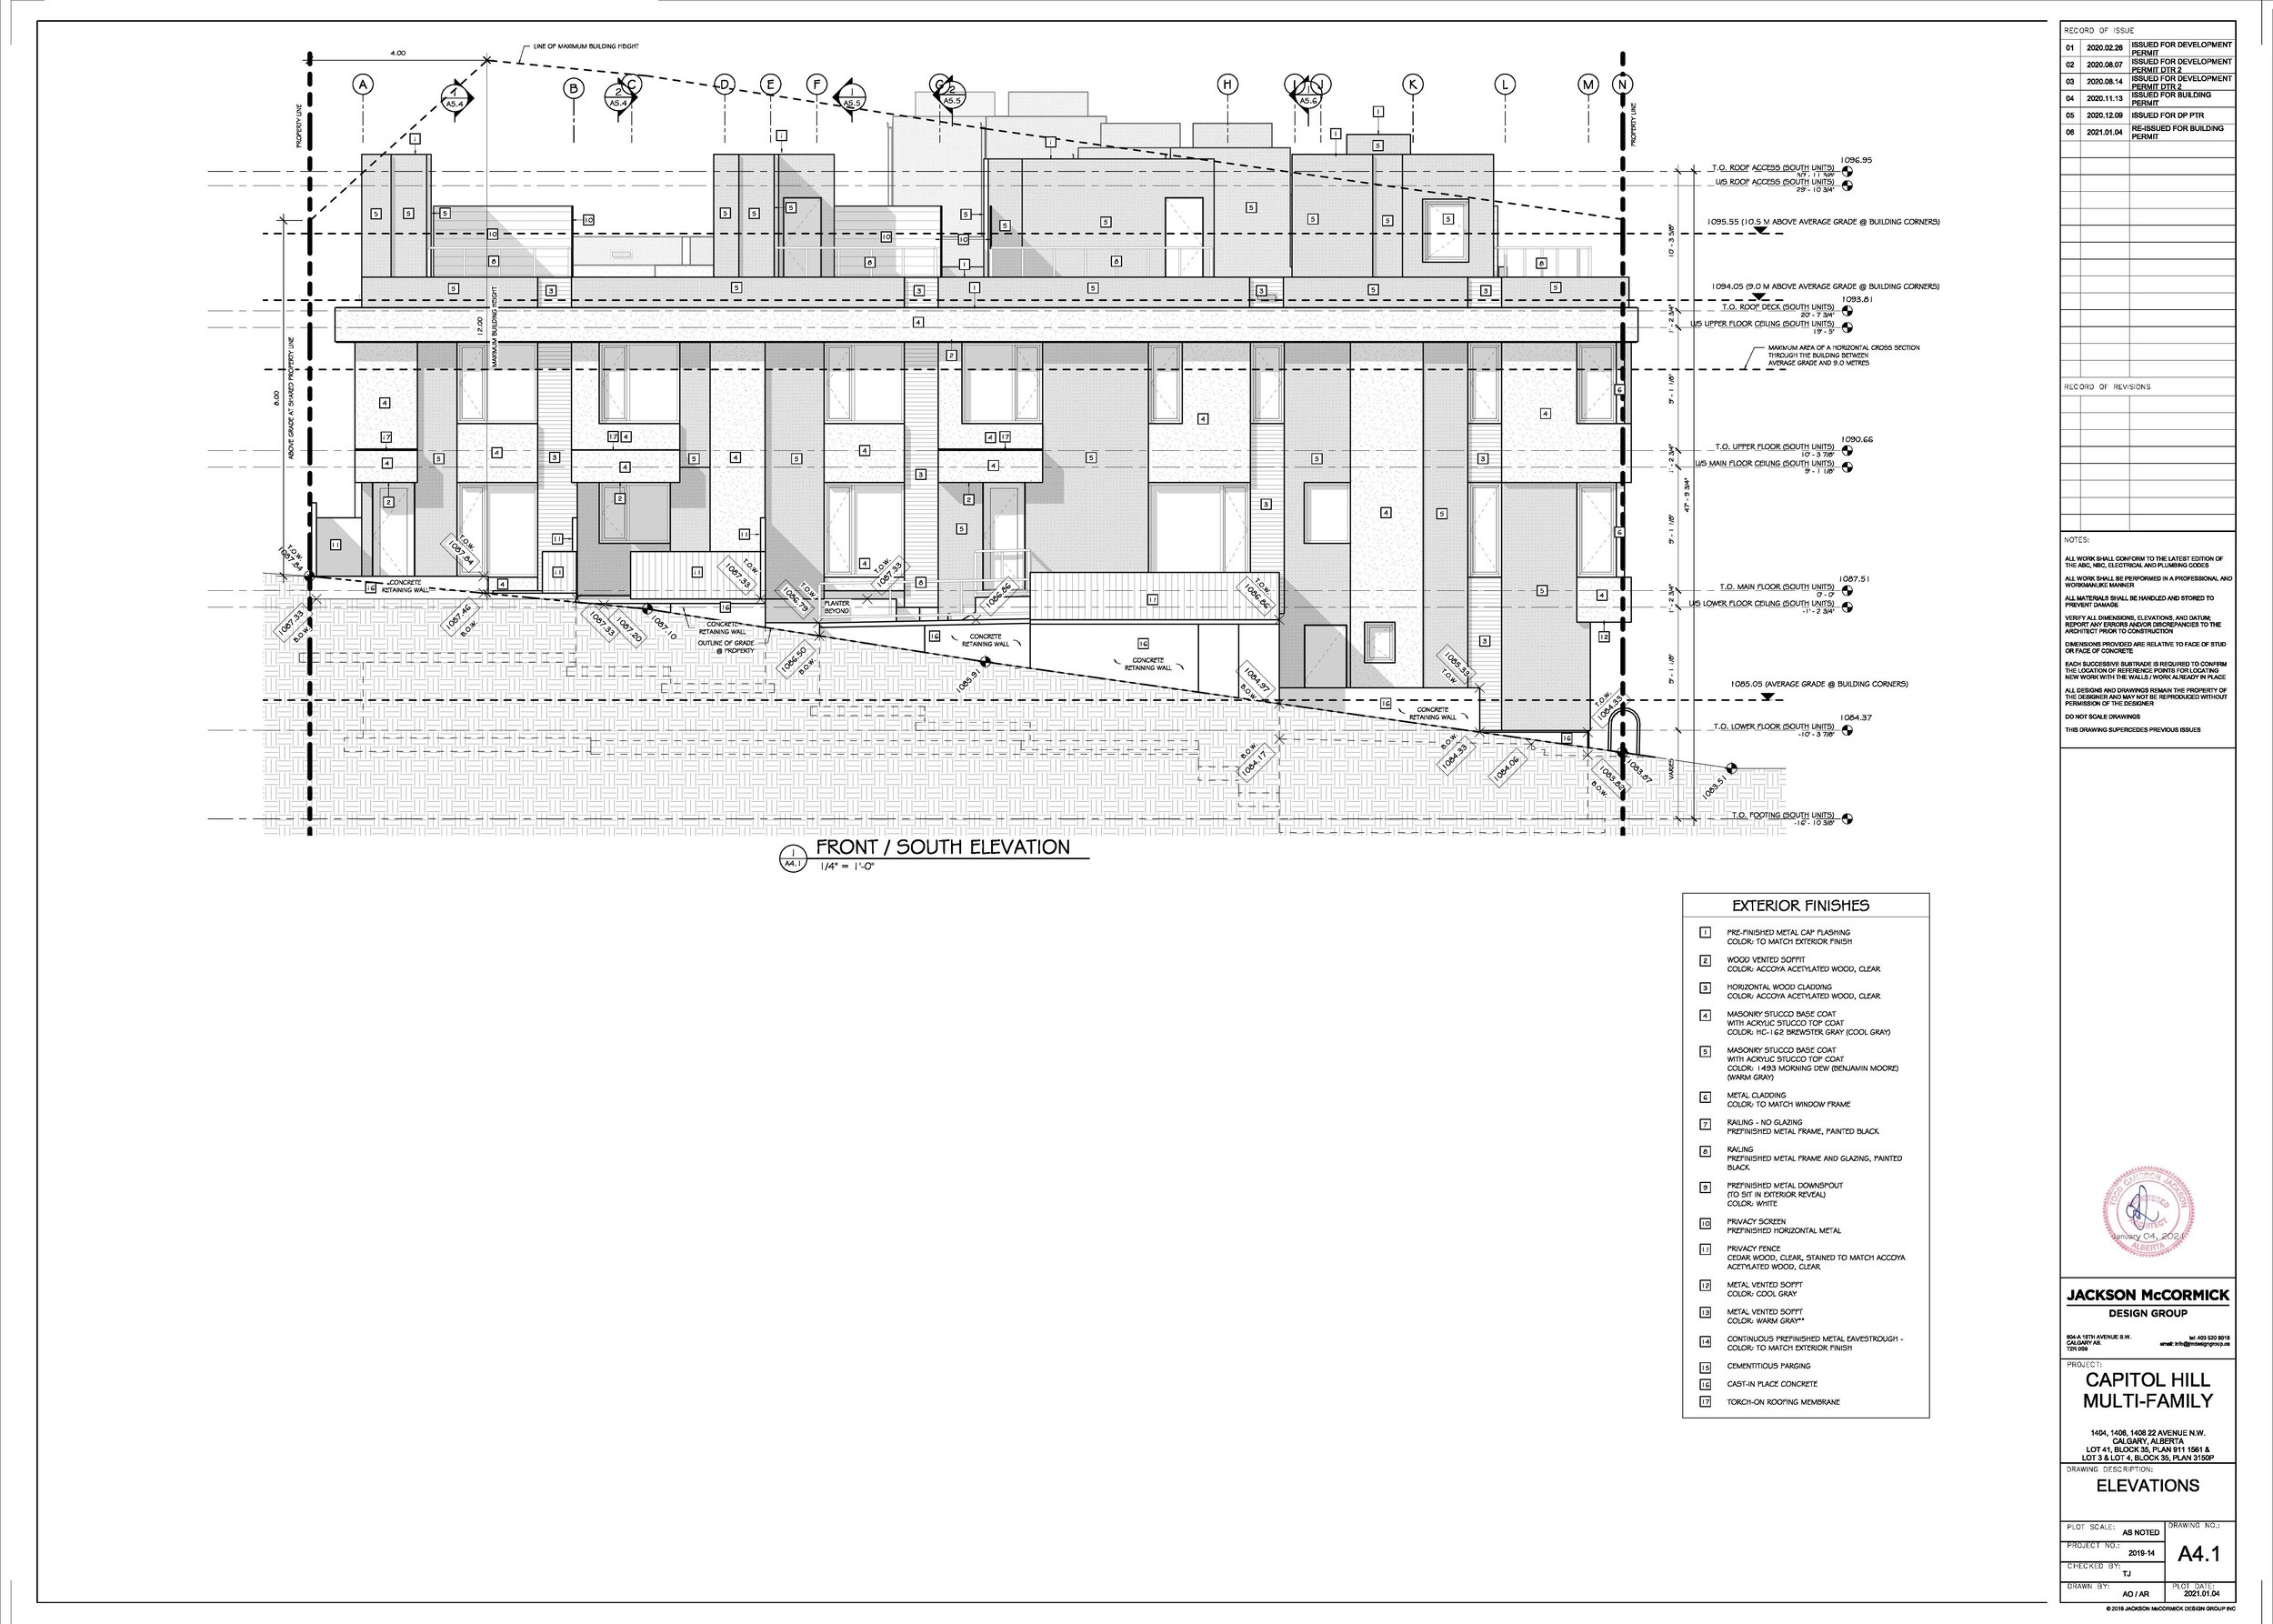 2021.01.04 - CAPITOL HILL MULTI-FAMILY - ARCH BP DRAWINGS_Page_14.jpg